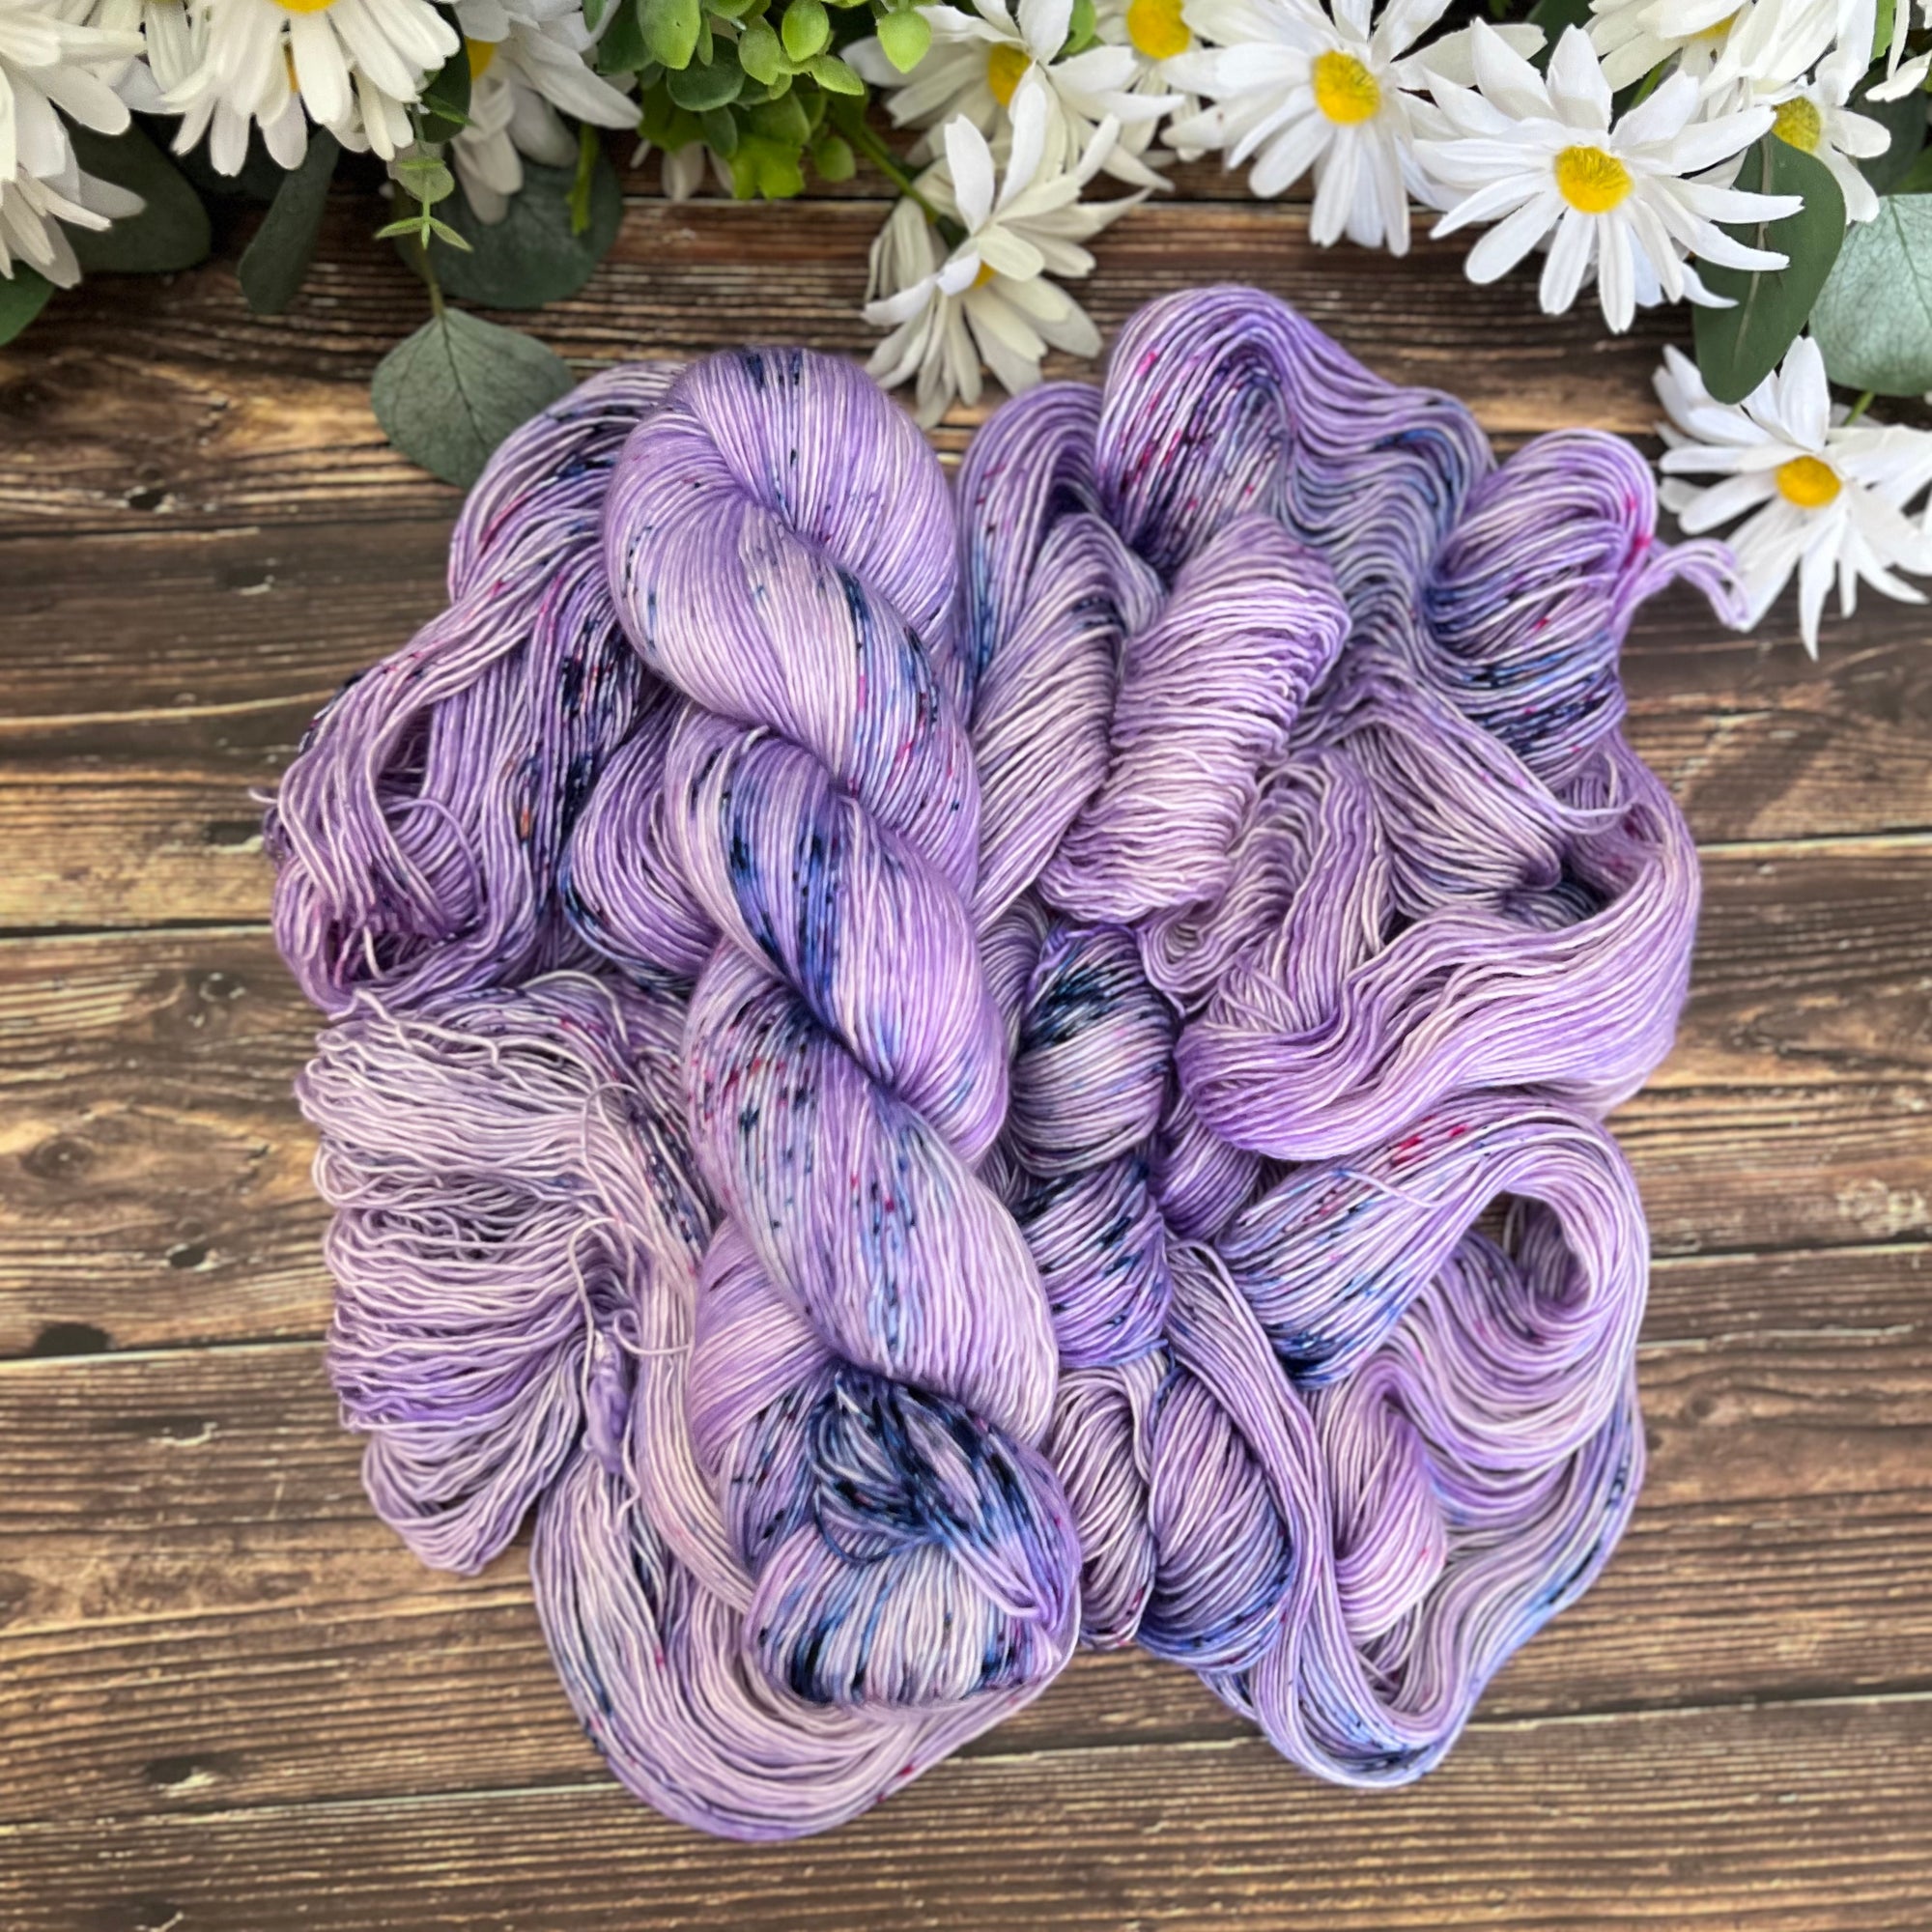 "Summer Violets" Hand-dyed Yarn